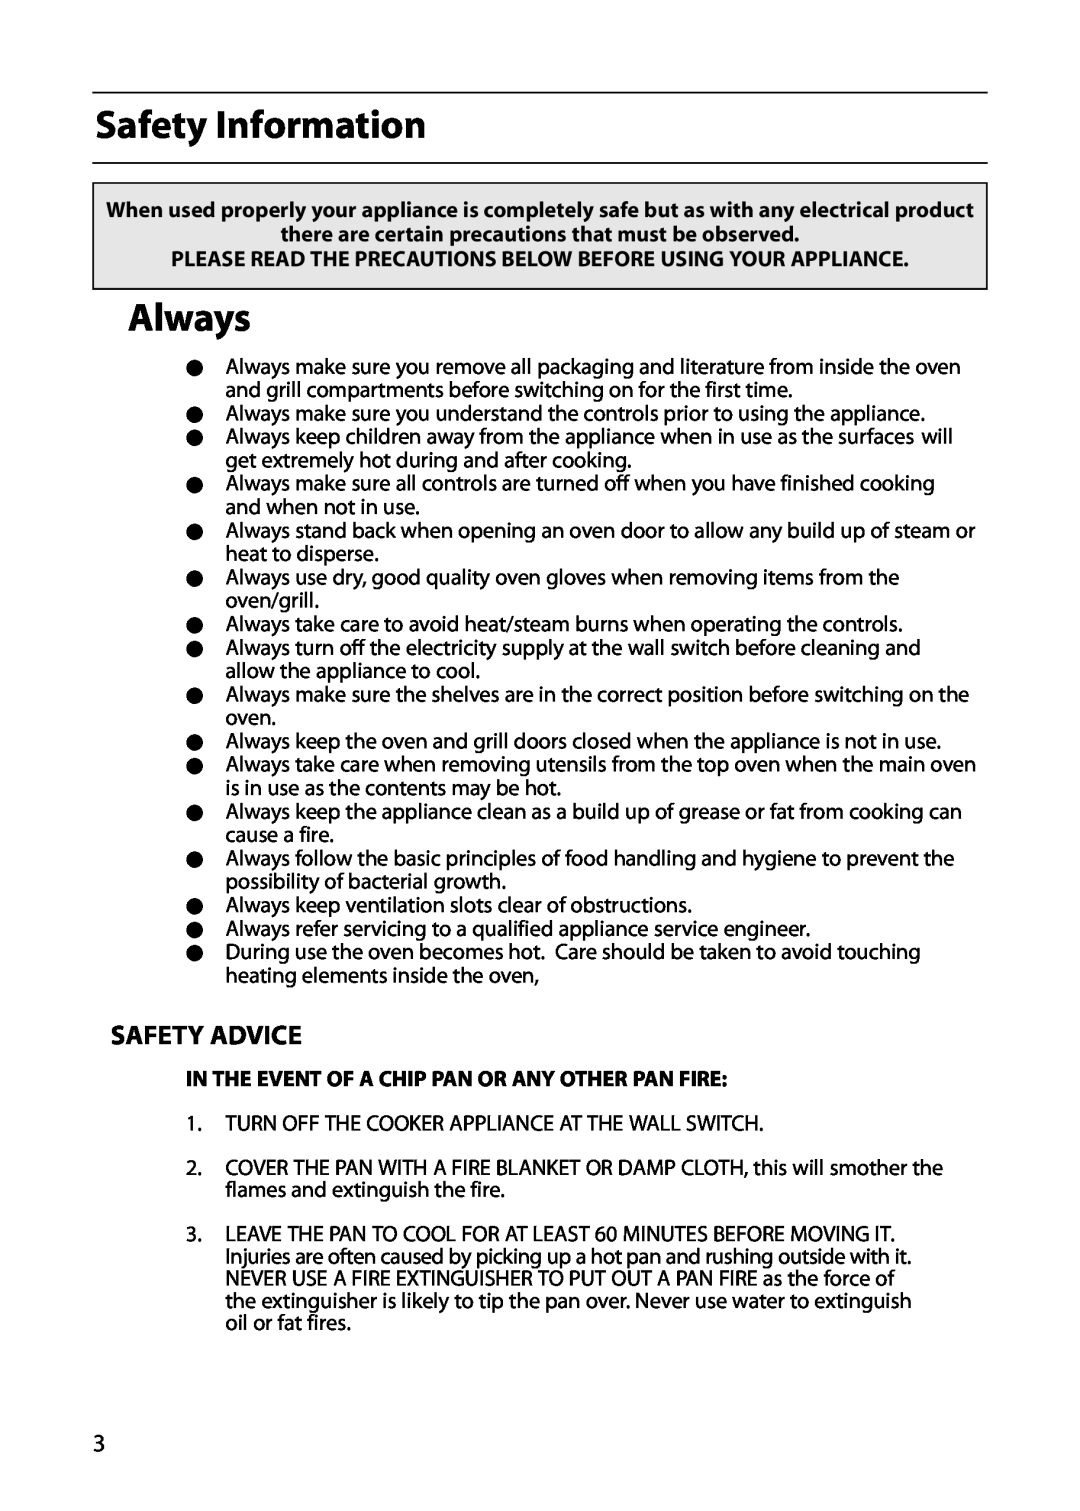 Hotpoint S130E manual Safety Information, Always, Safety Advice, there are certain precautions that must be observed 